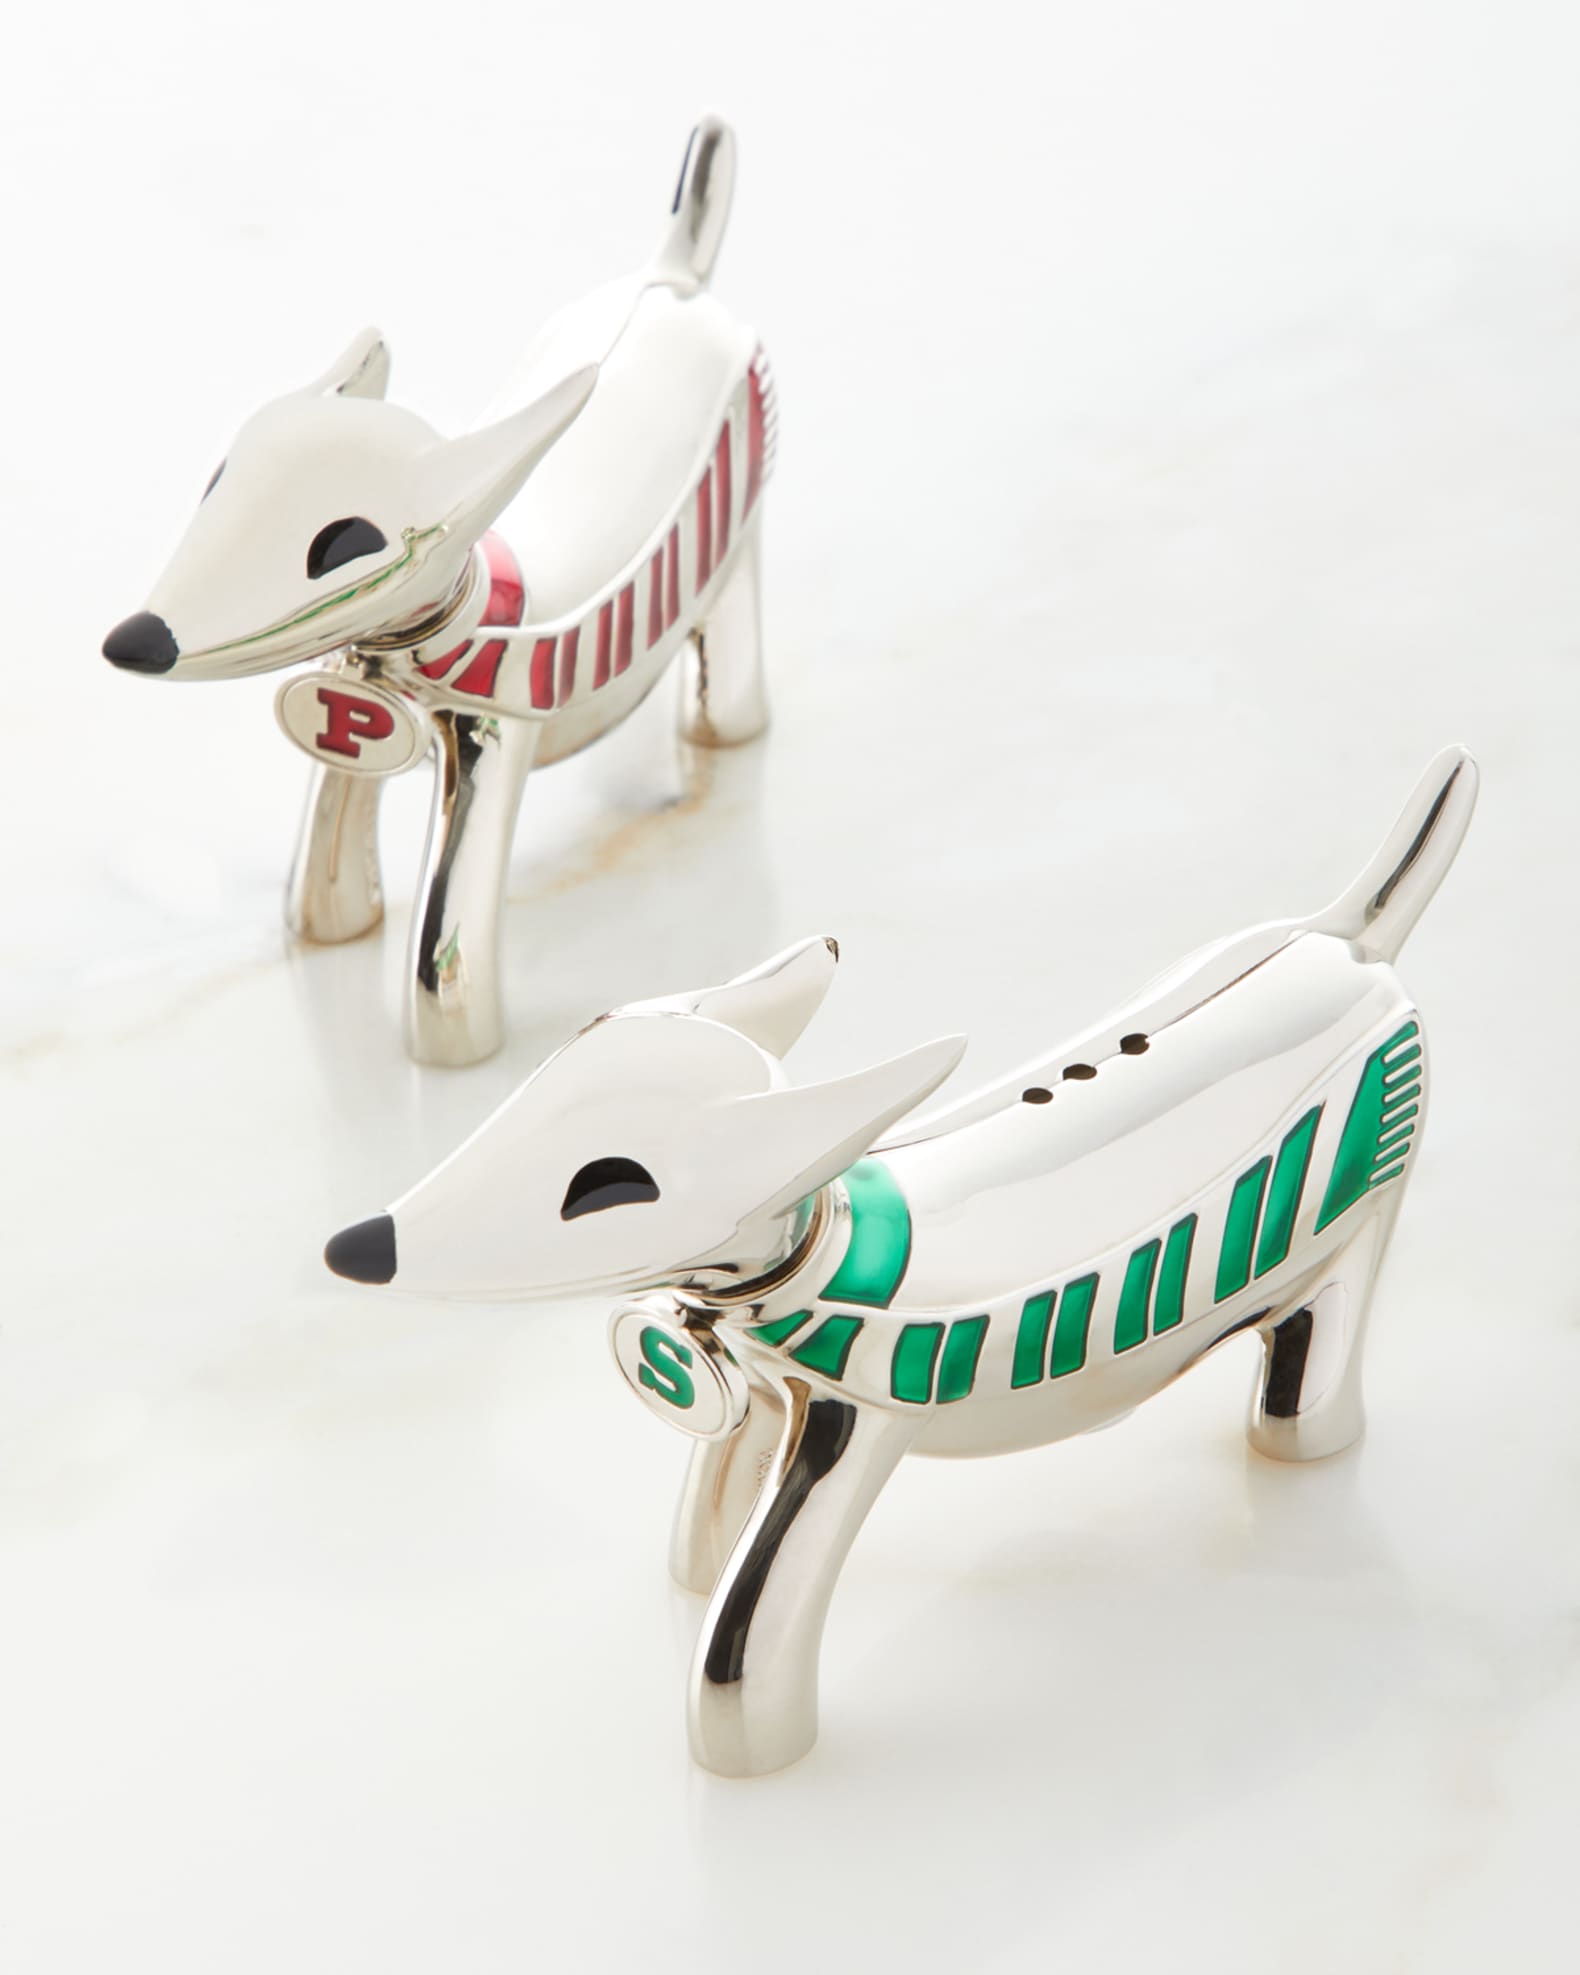  Cosmos Gifts 57013 Christmas Dachshund Dogs Salt and Pepper  Shaker, Multicolor, 3 3/8 x 1 5/8 x 3 7/8H: Home & Kitchen